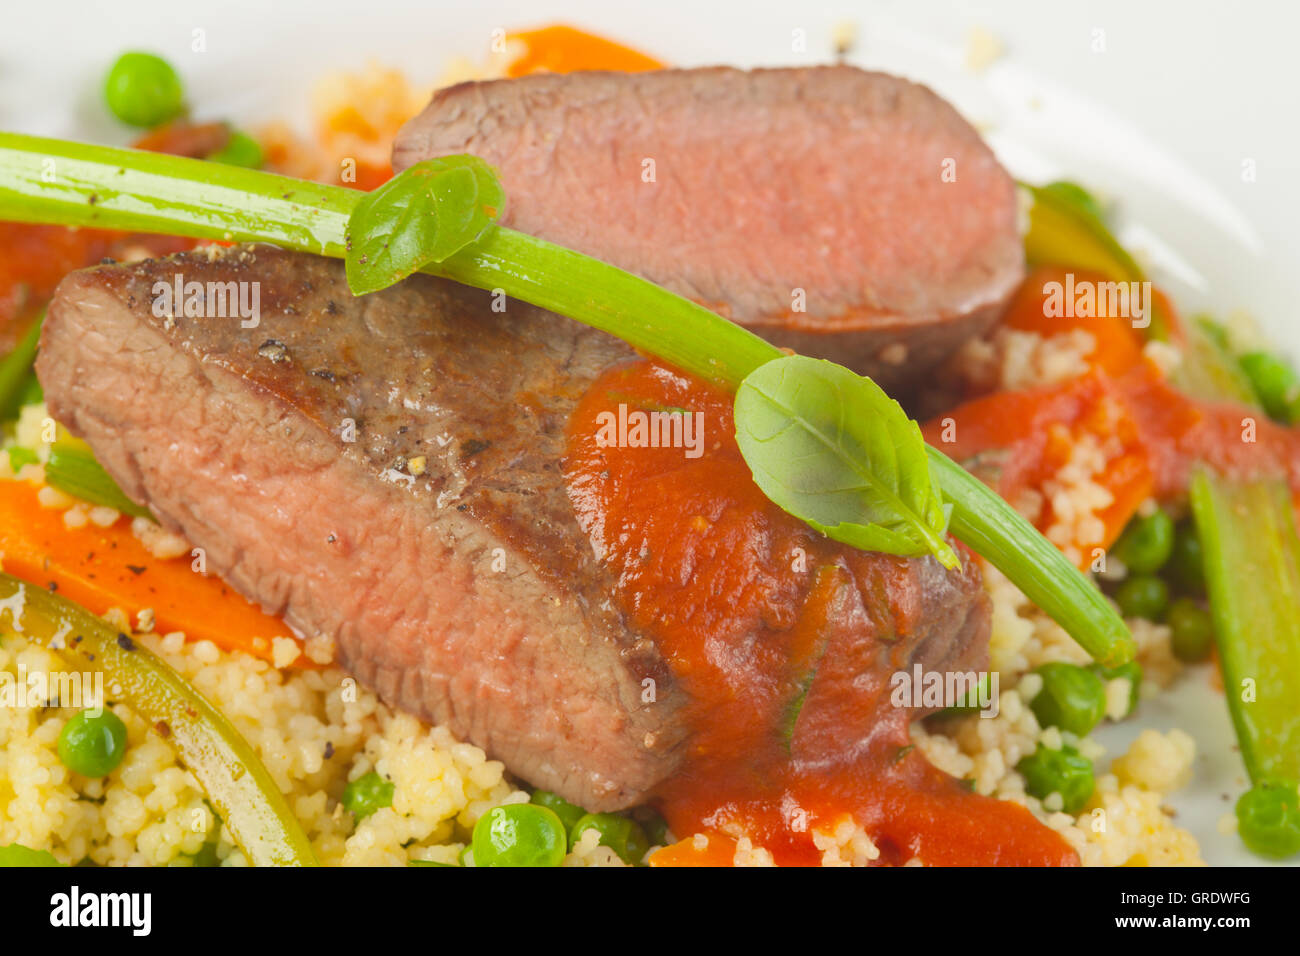 Roast Lamb On Rice With Carrots And Peas Stock Photo